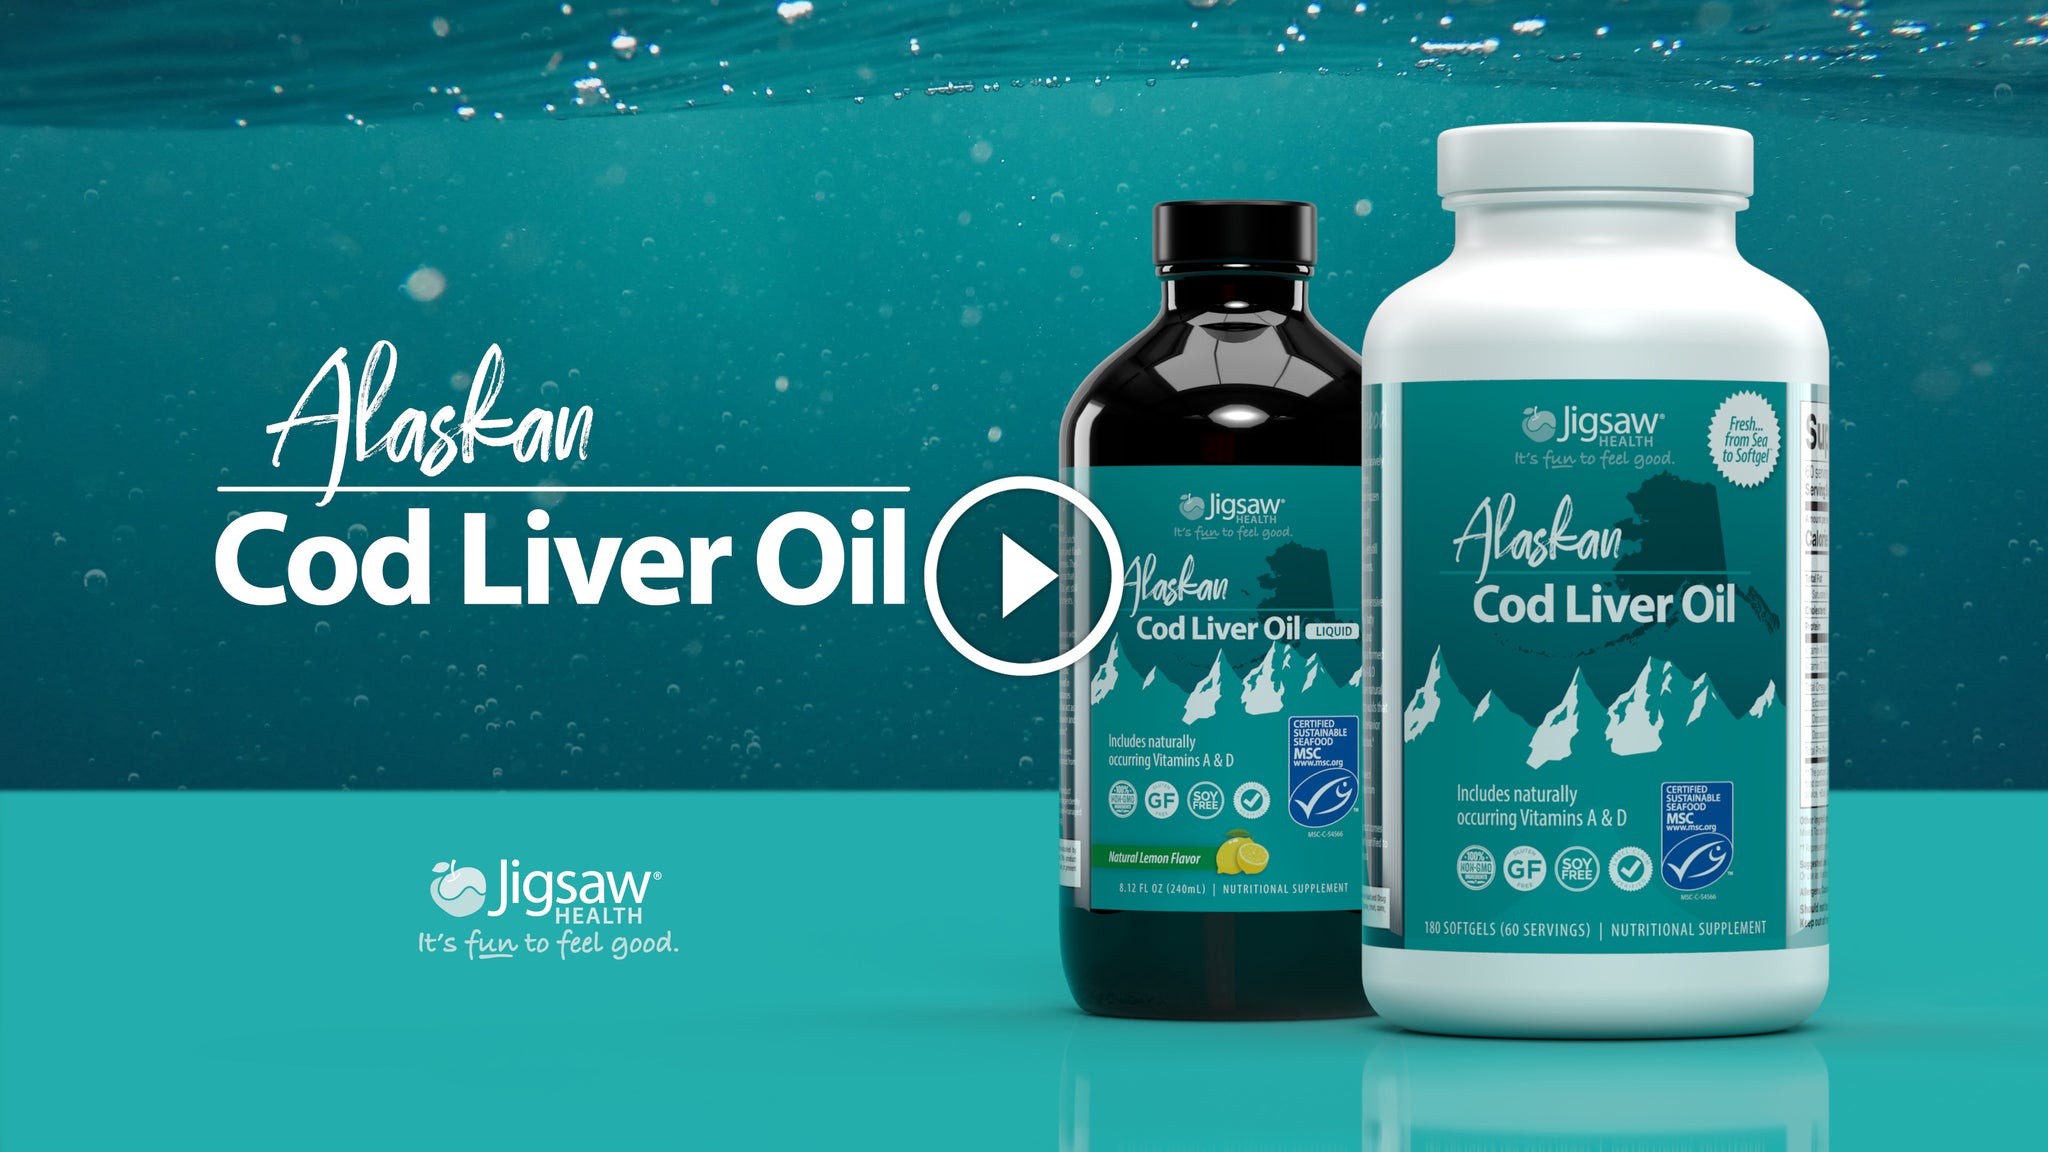 What is Alaskan Cod Liver Oil?